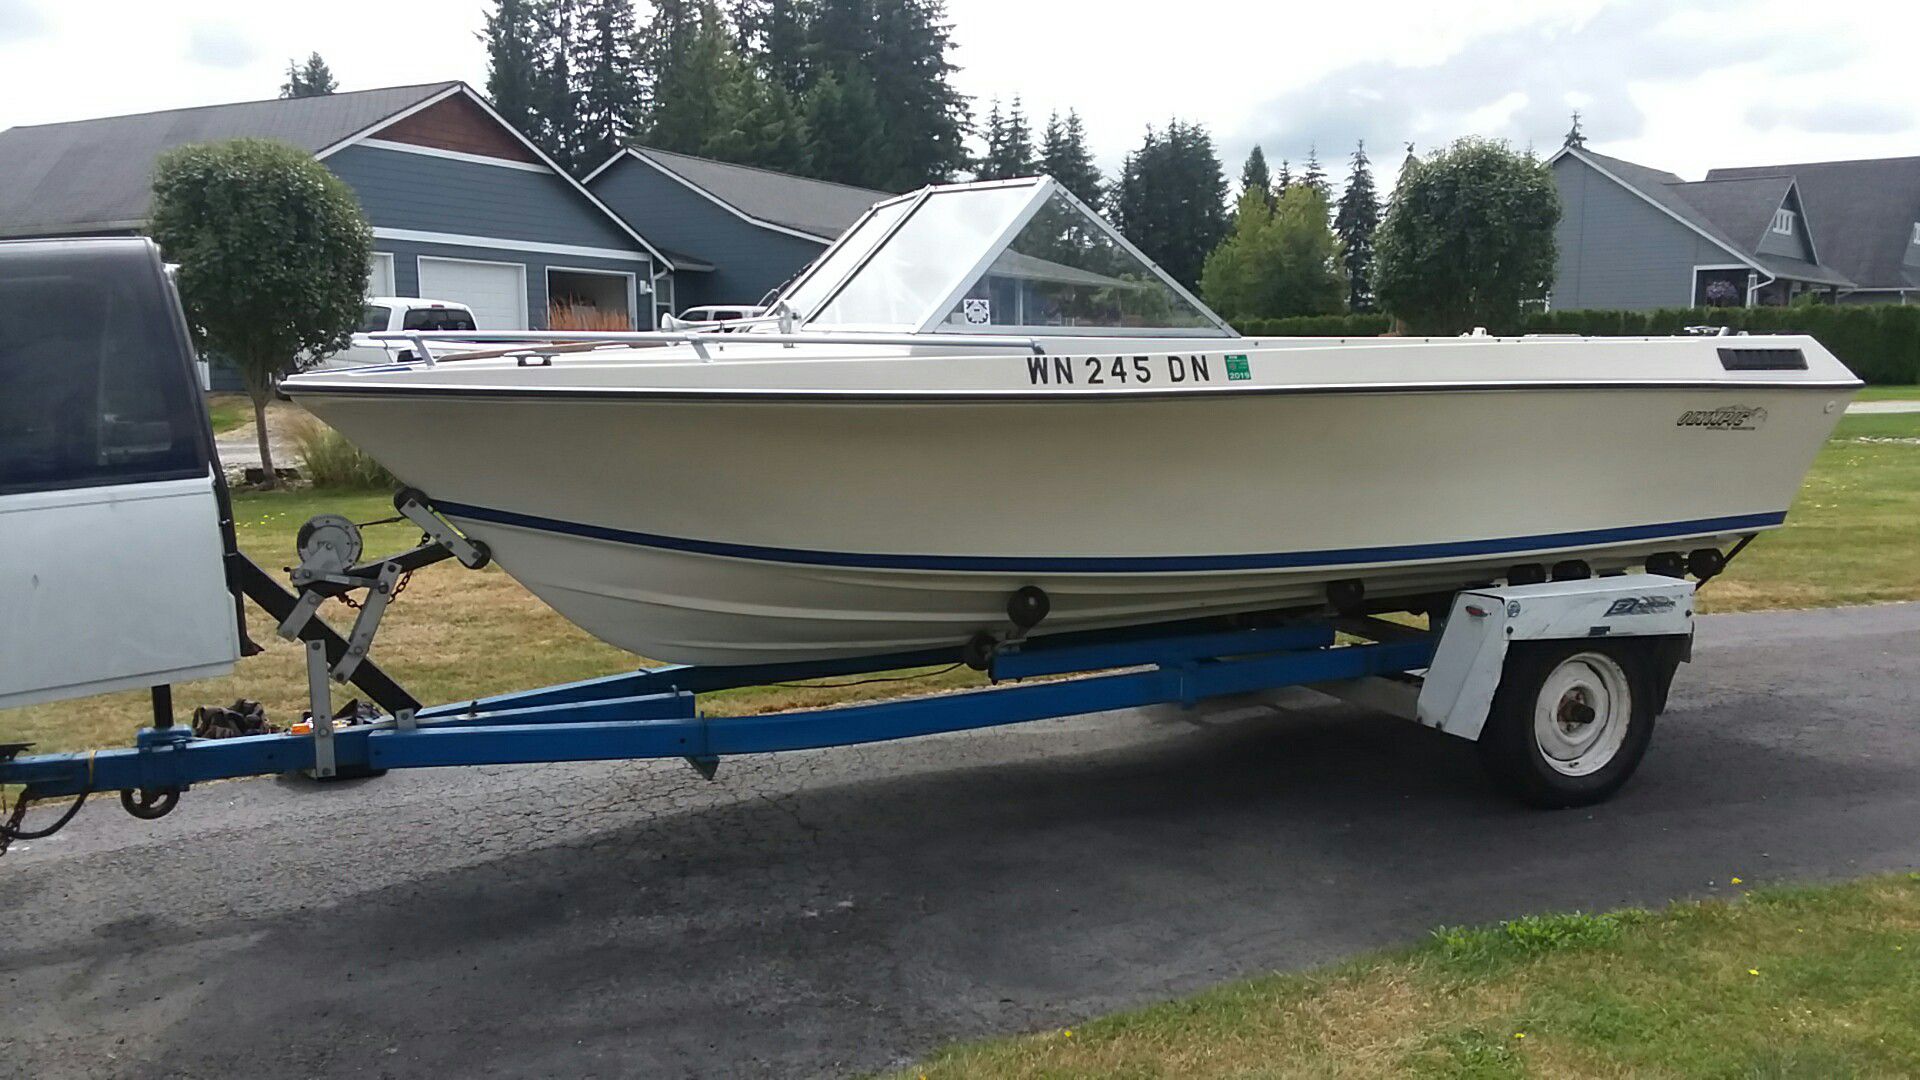 For sale 18' Olympic runabout1979great boat good shape for the age .1978 ez loader trailer new bearings all lights work great condition for the yr.